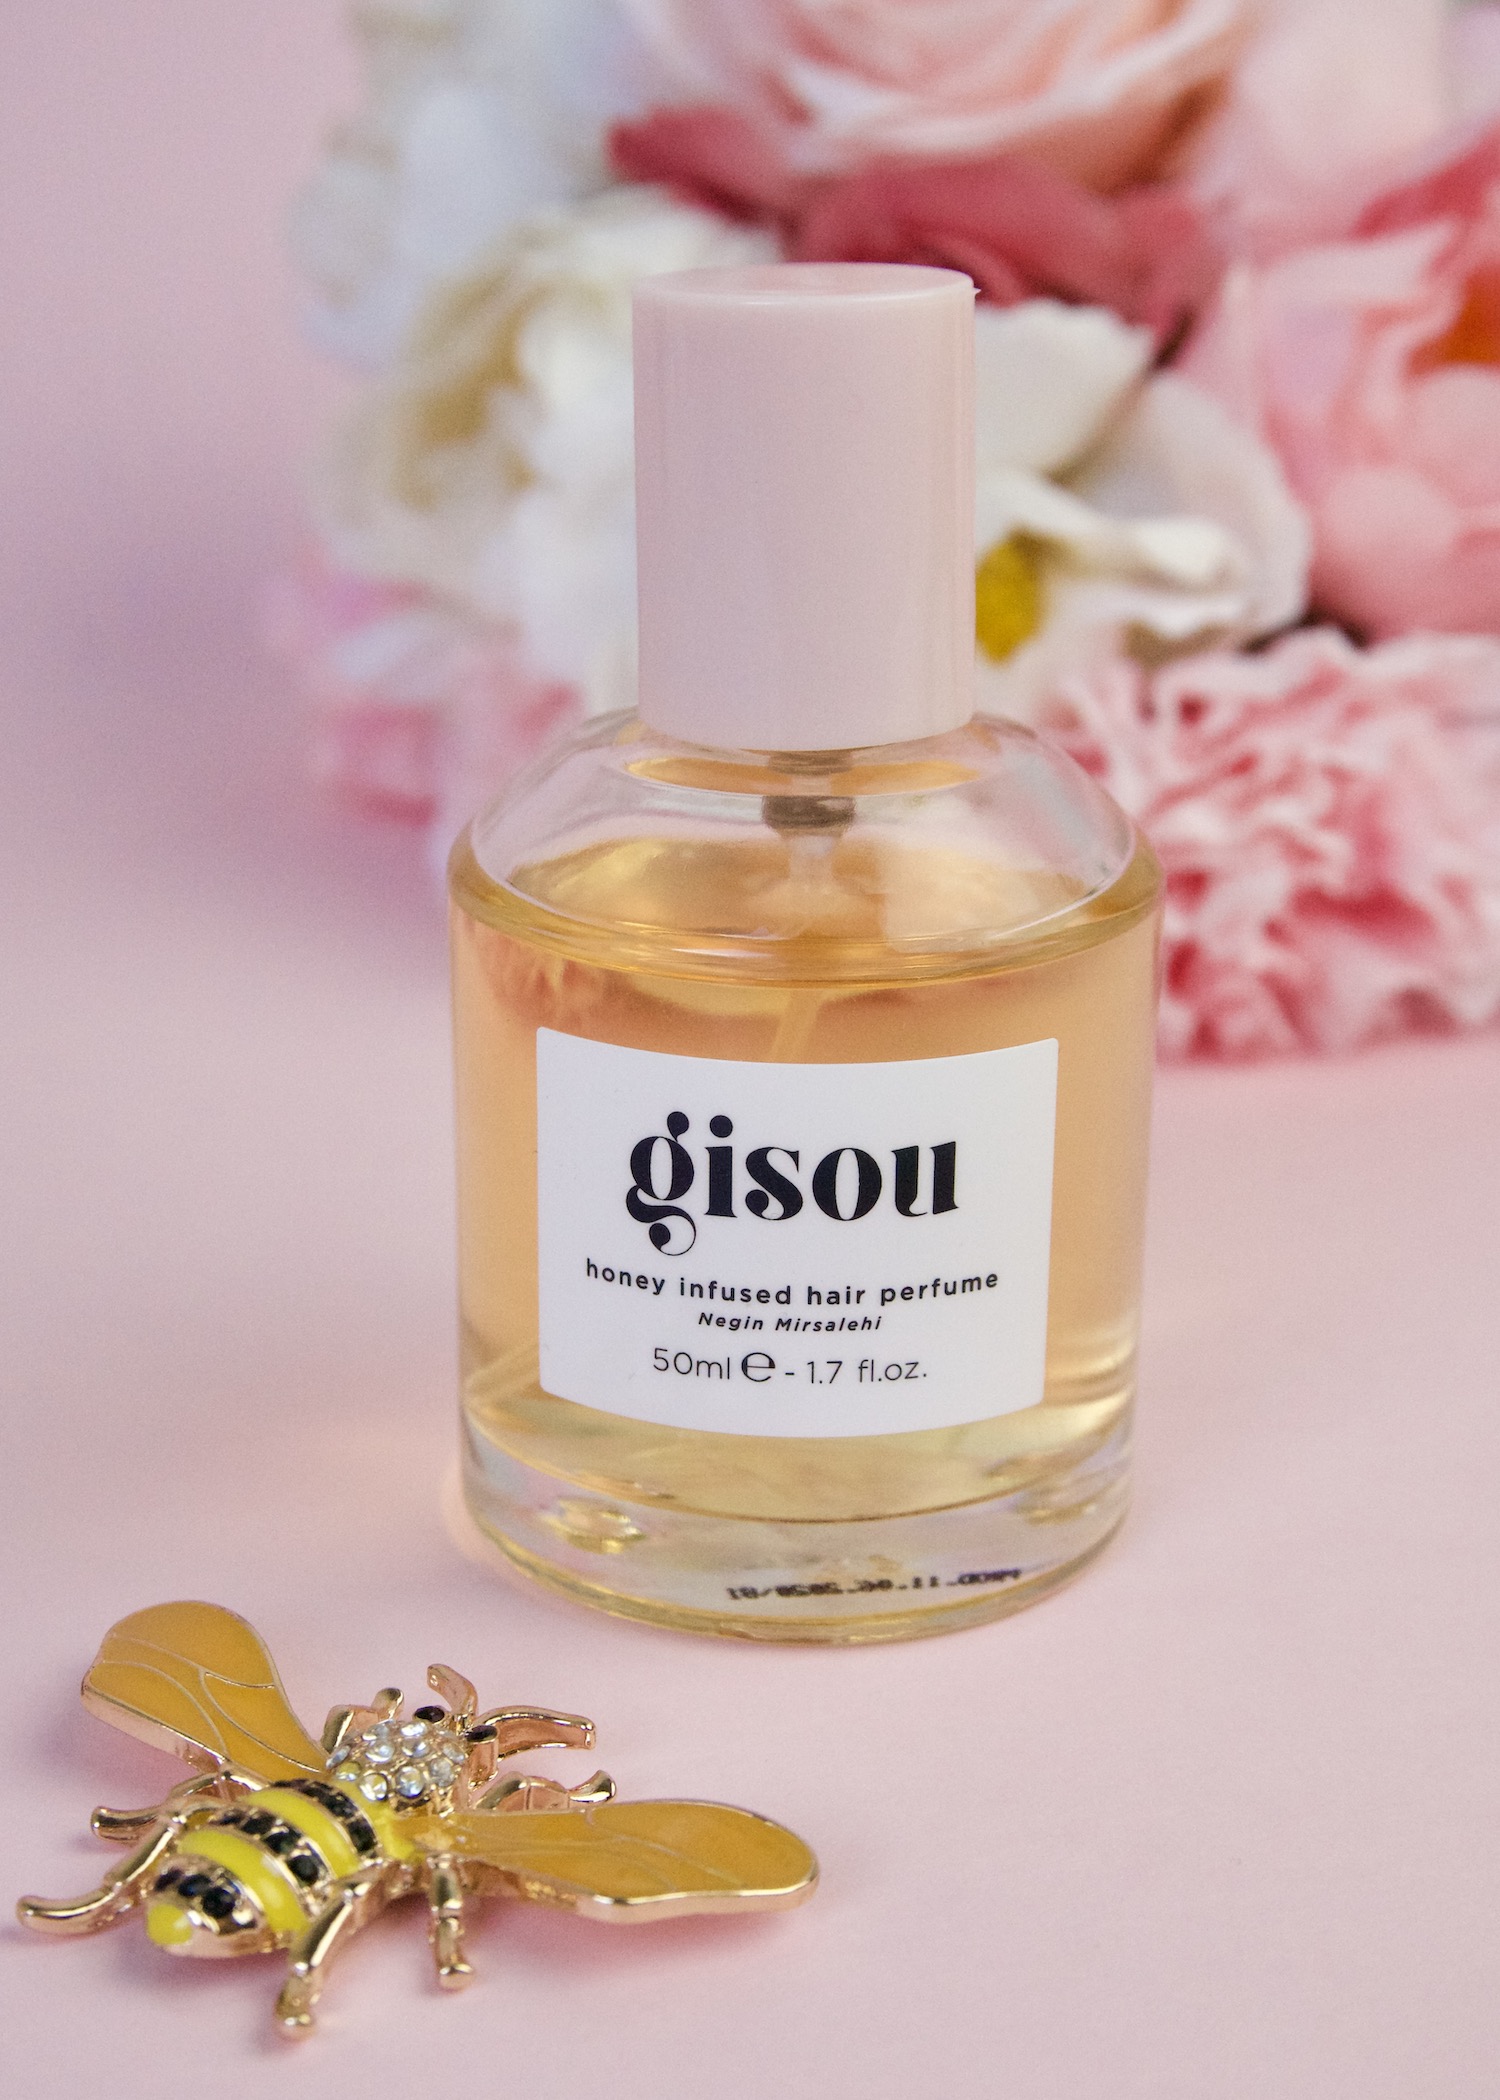 Gisou Honey Infused Hair Perfume review